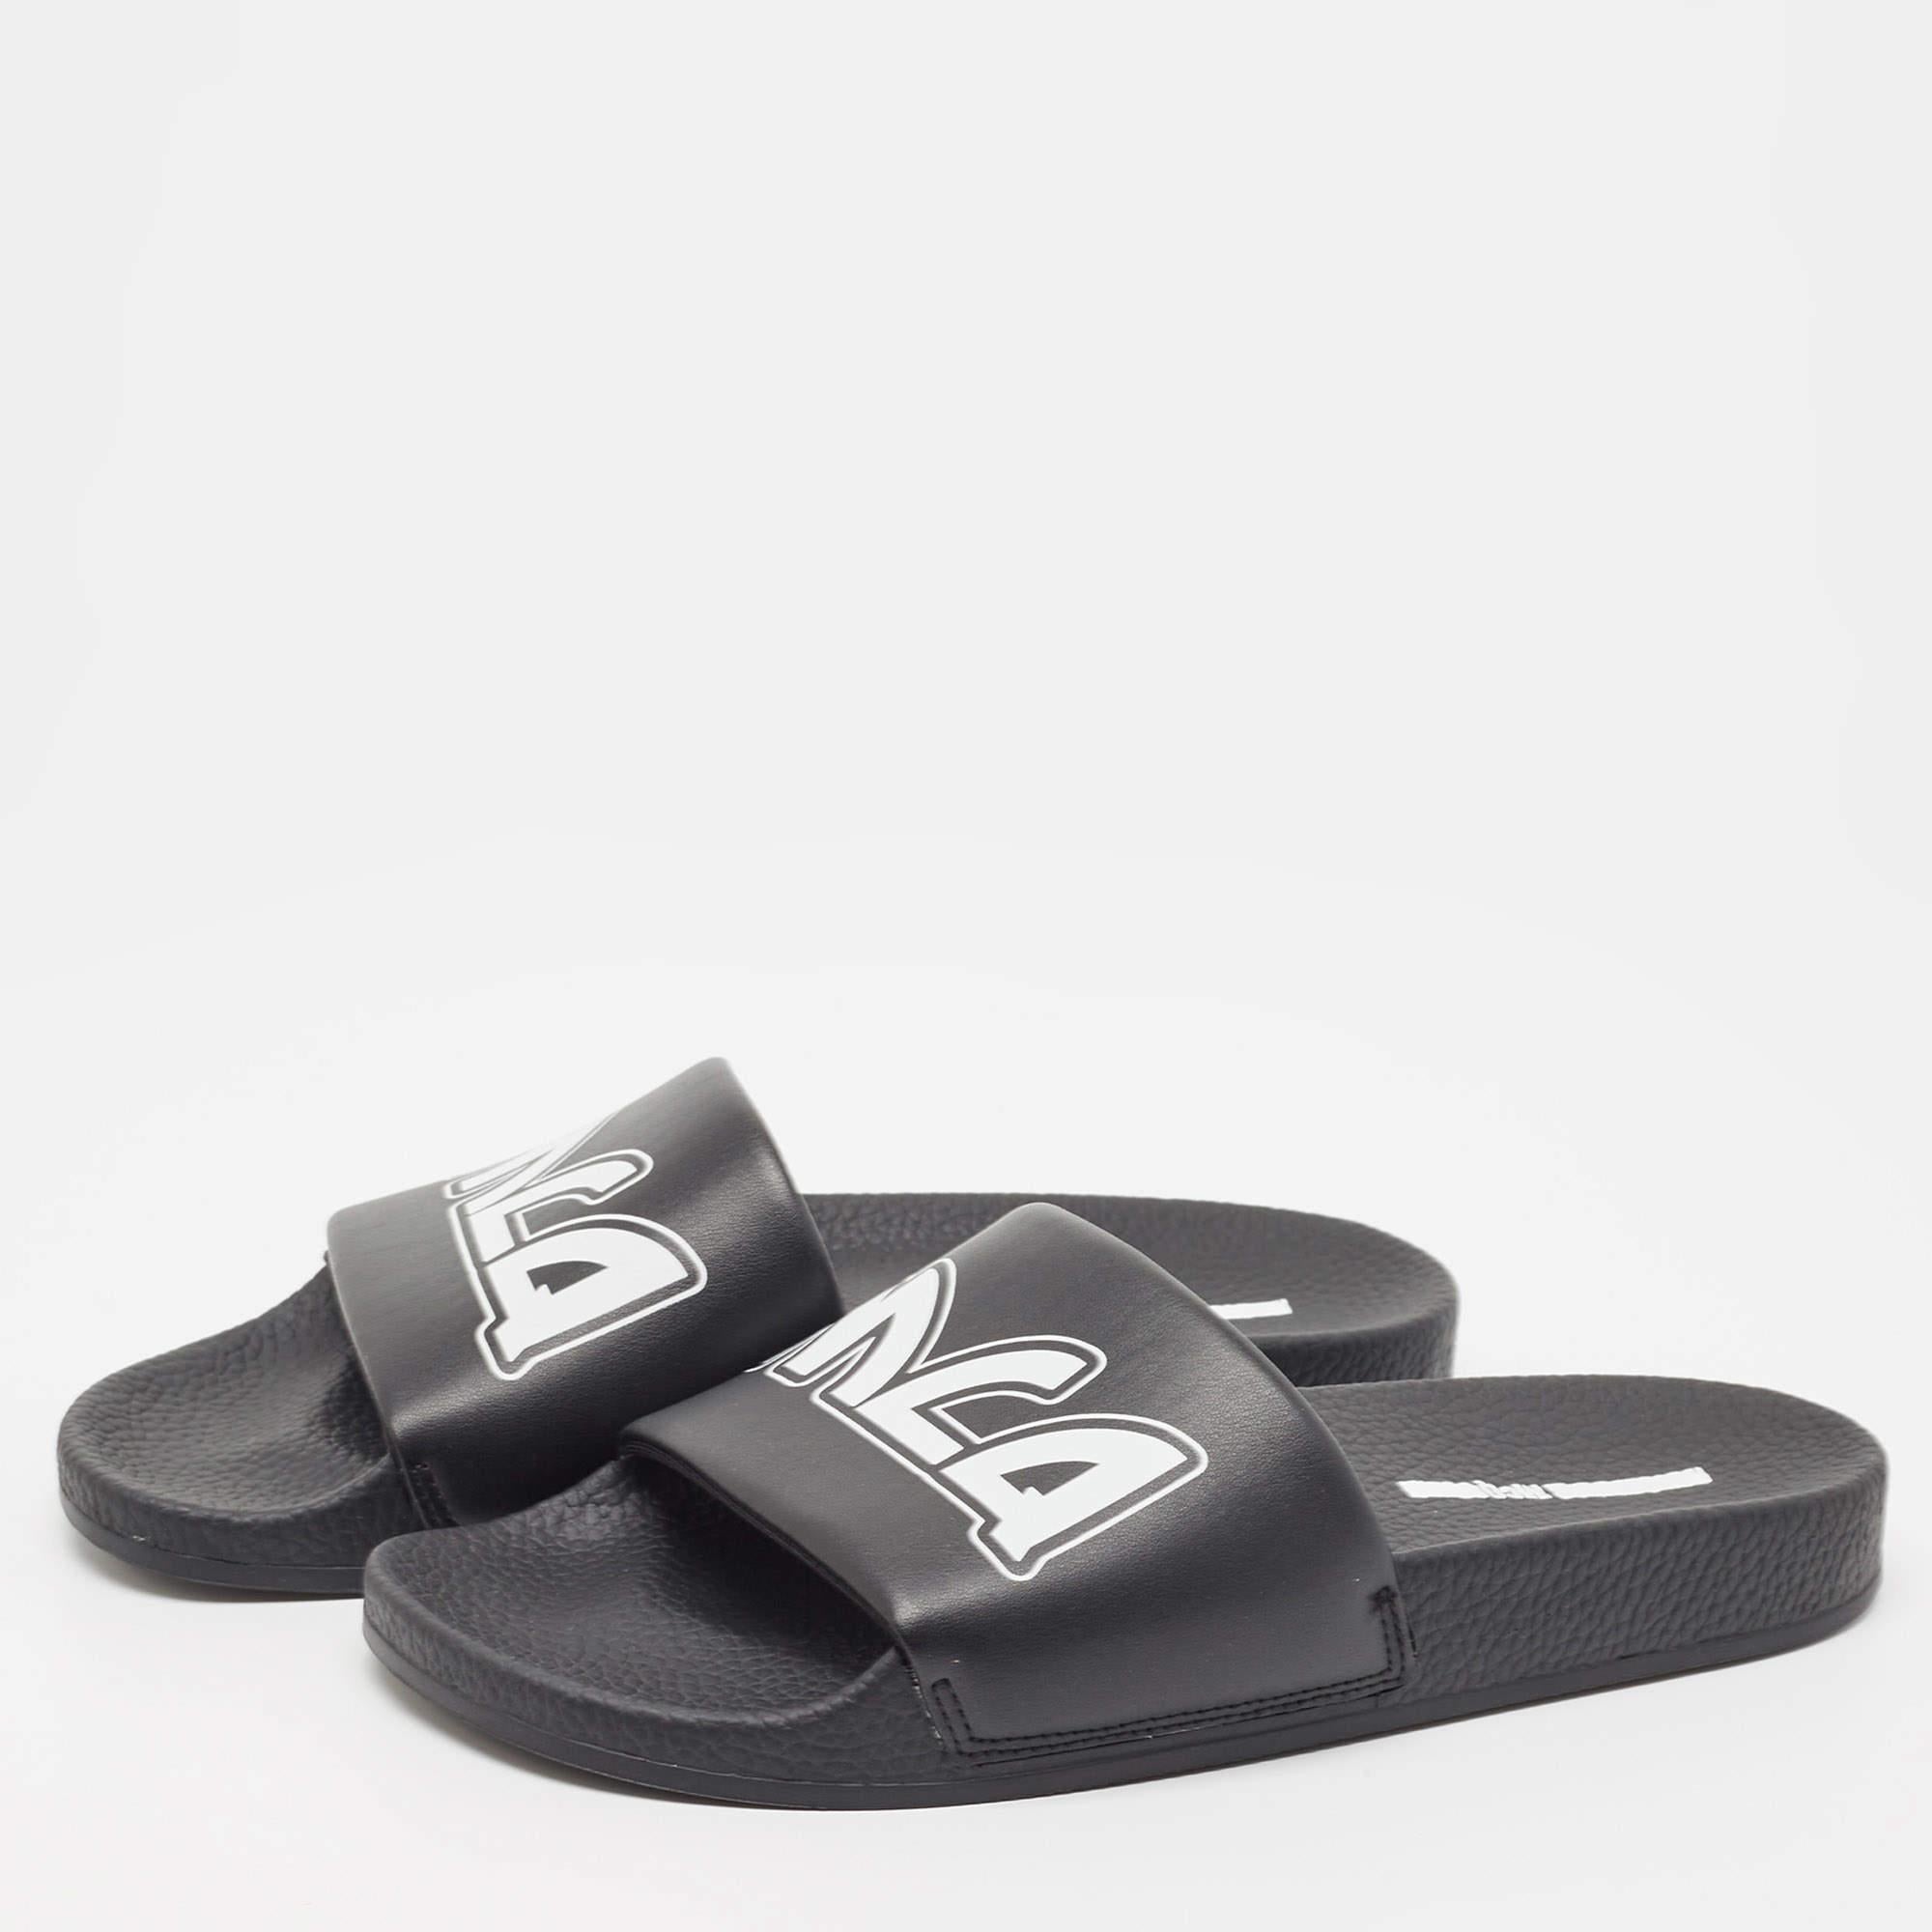 Enhance your casual looks with a touch of high style with these designer slides. Rendered in quality material with a lovely hue adorning its expanse, this pair is a must-have!

Includes: Original Box, Brand Tag